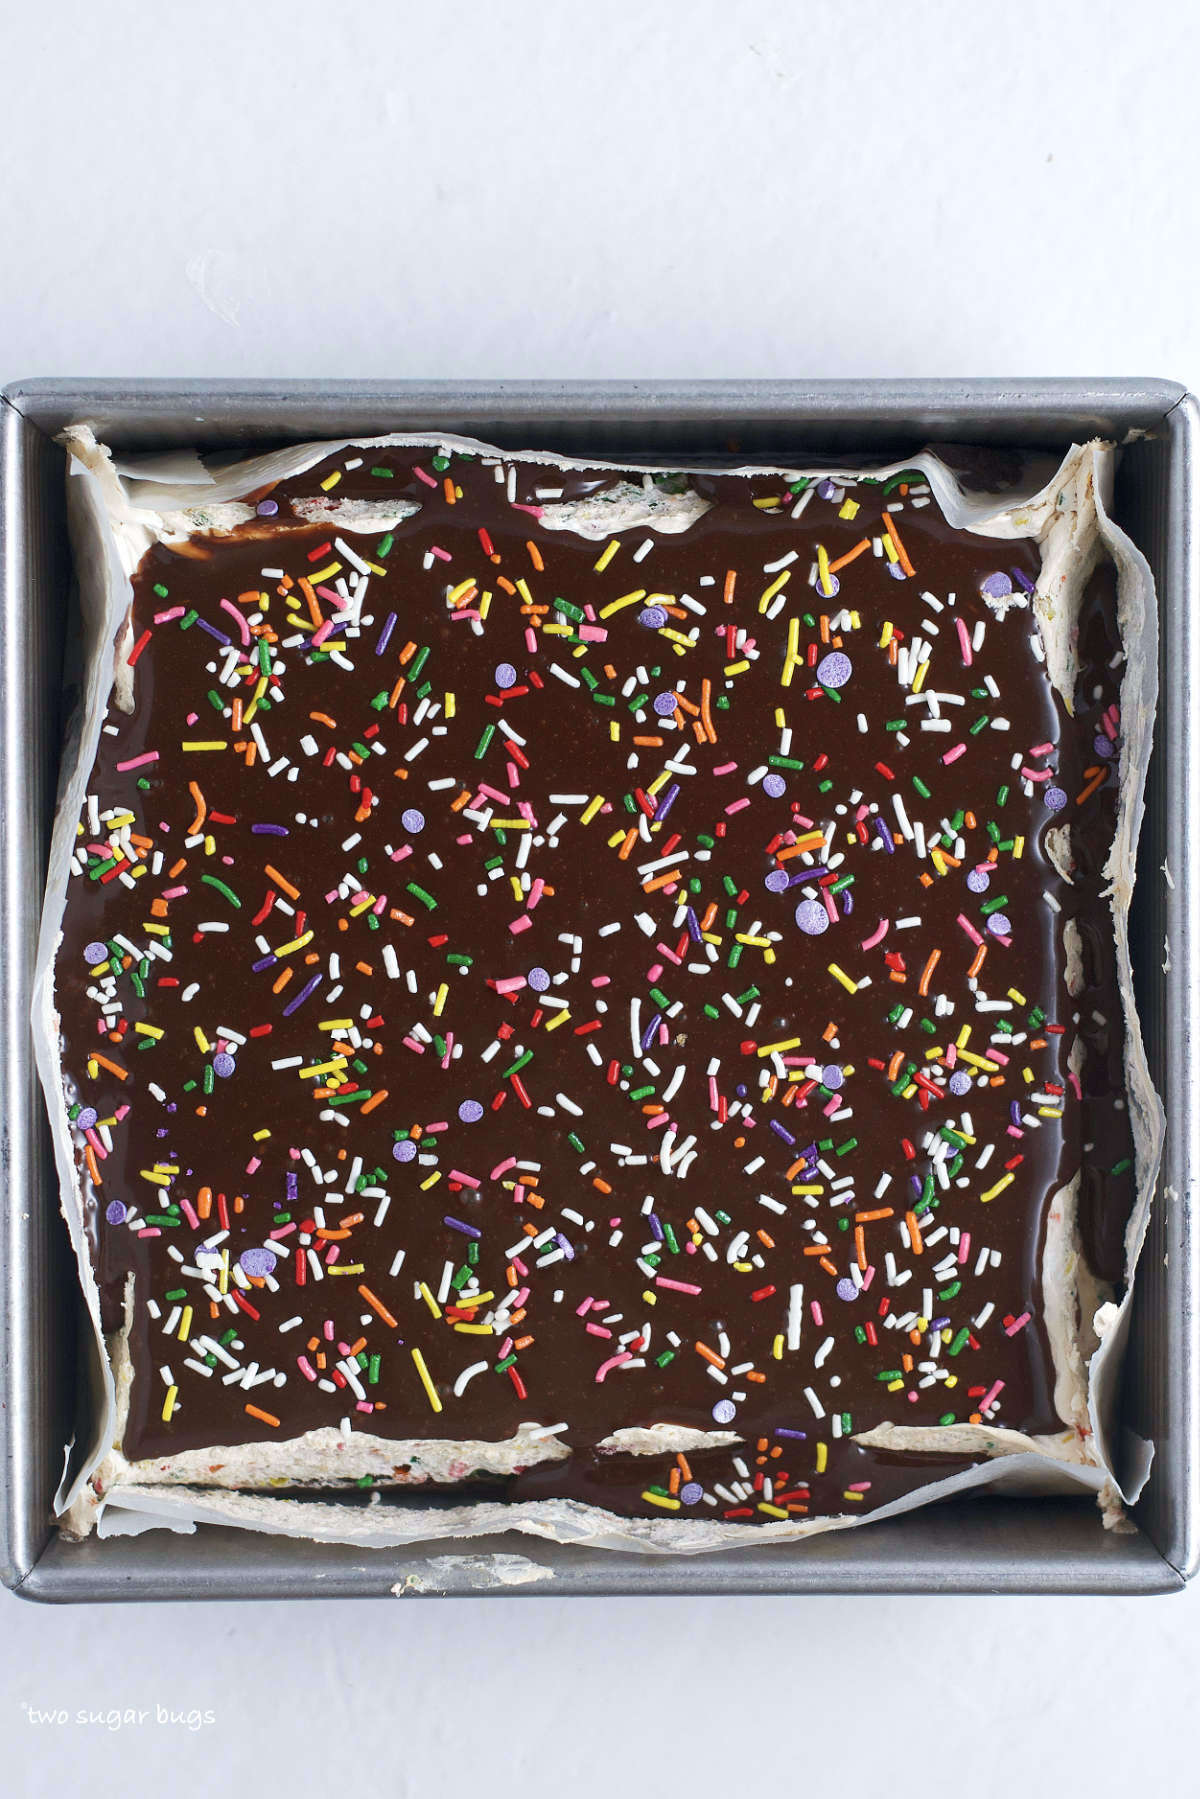 baked funfetti brownies in the baking pan